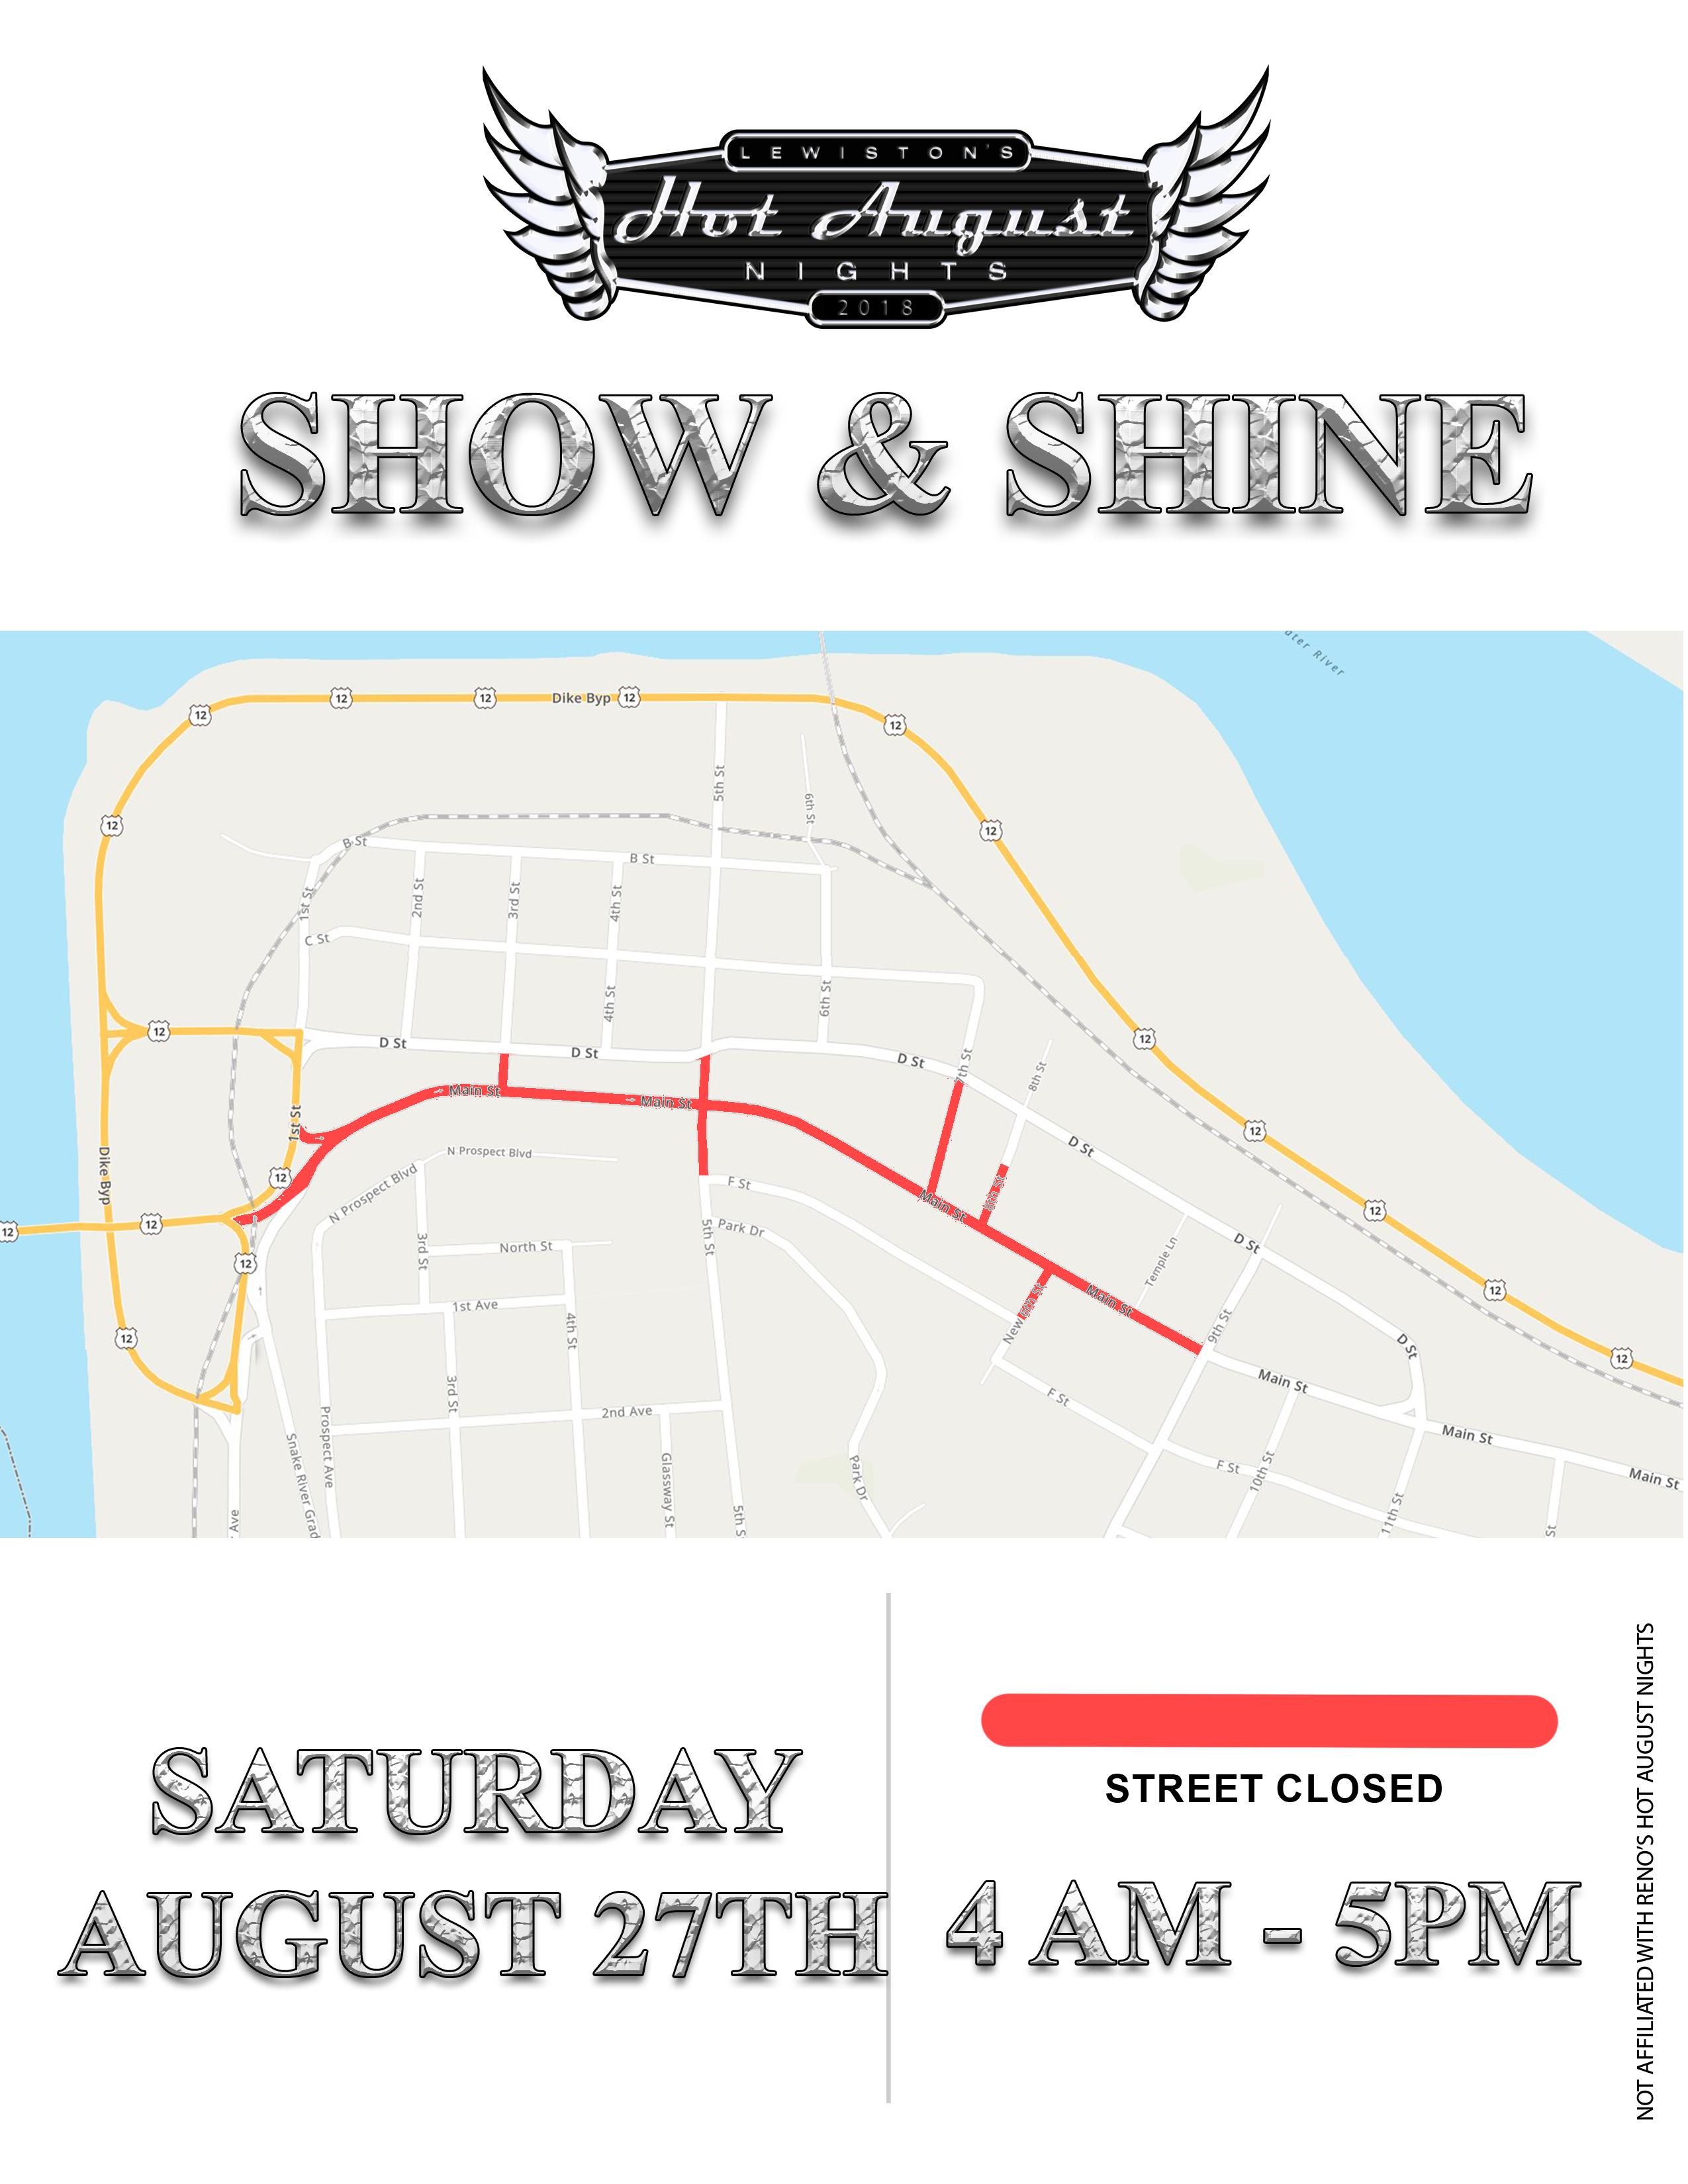 Lewston's Hot August Nights Saturday Show and Shine Event Map